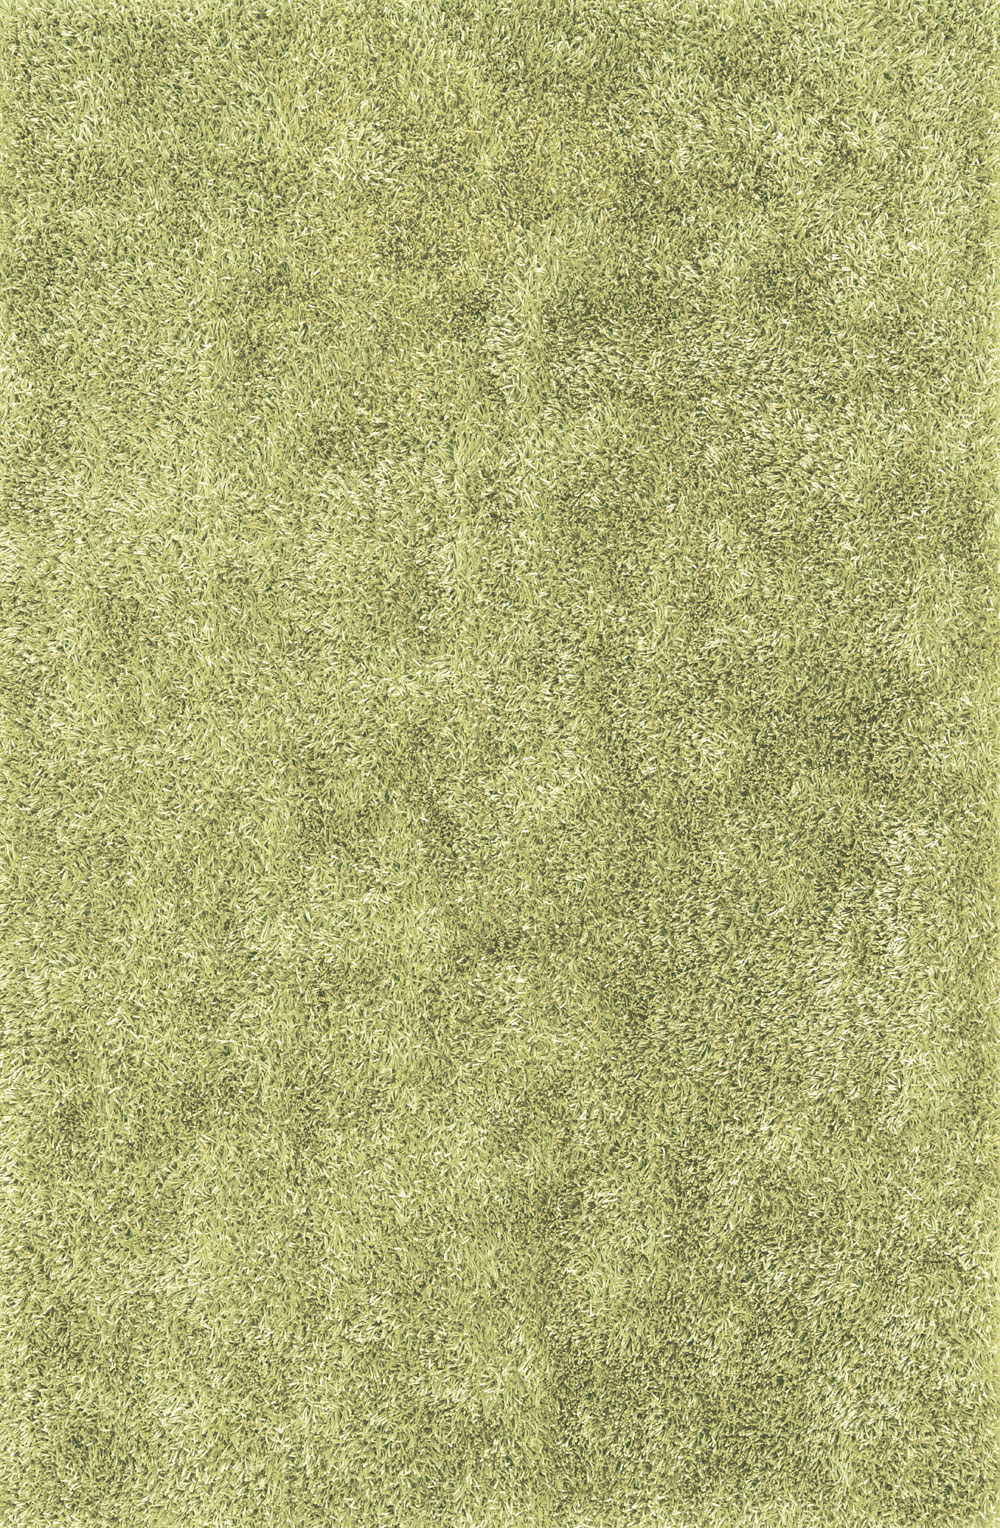 Dalyn Illusions IL69 Willow Rug